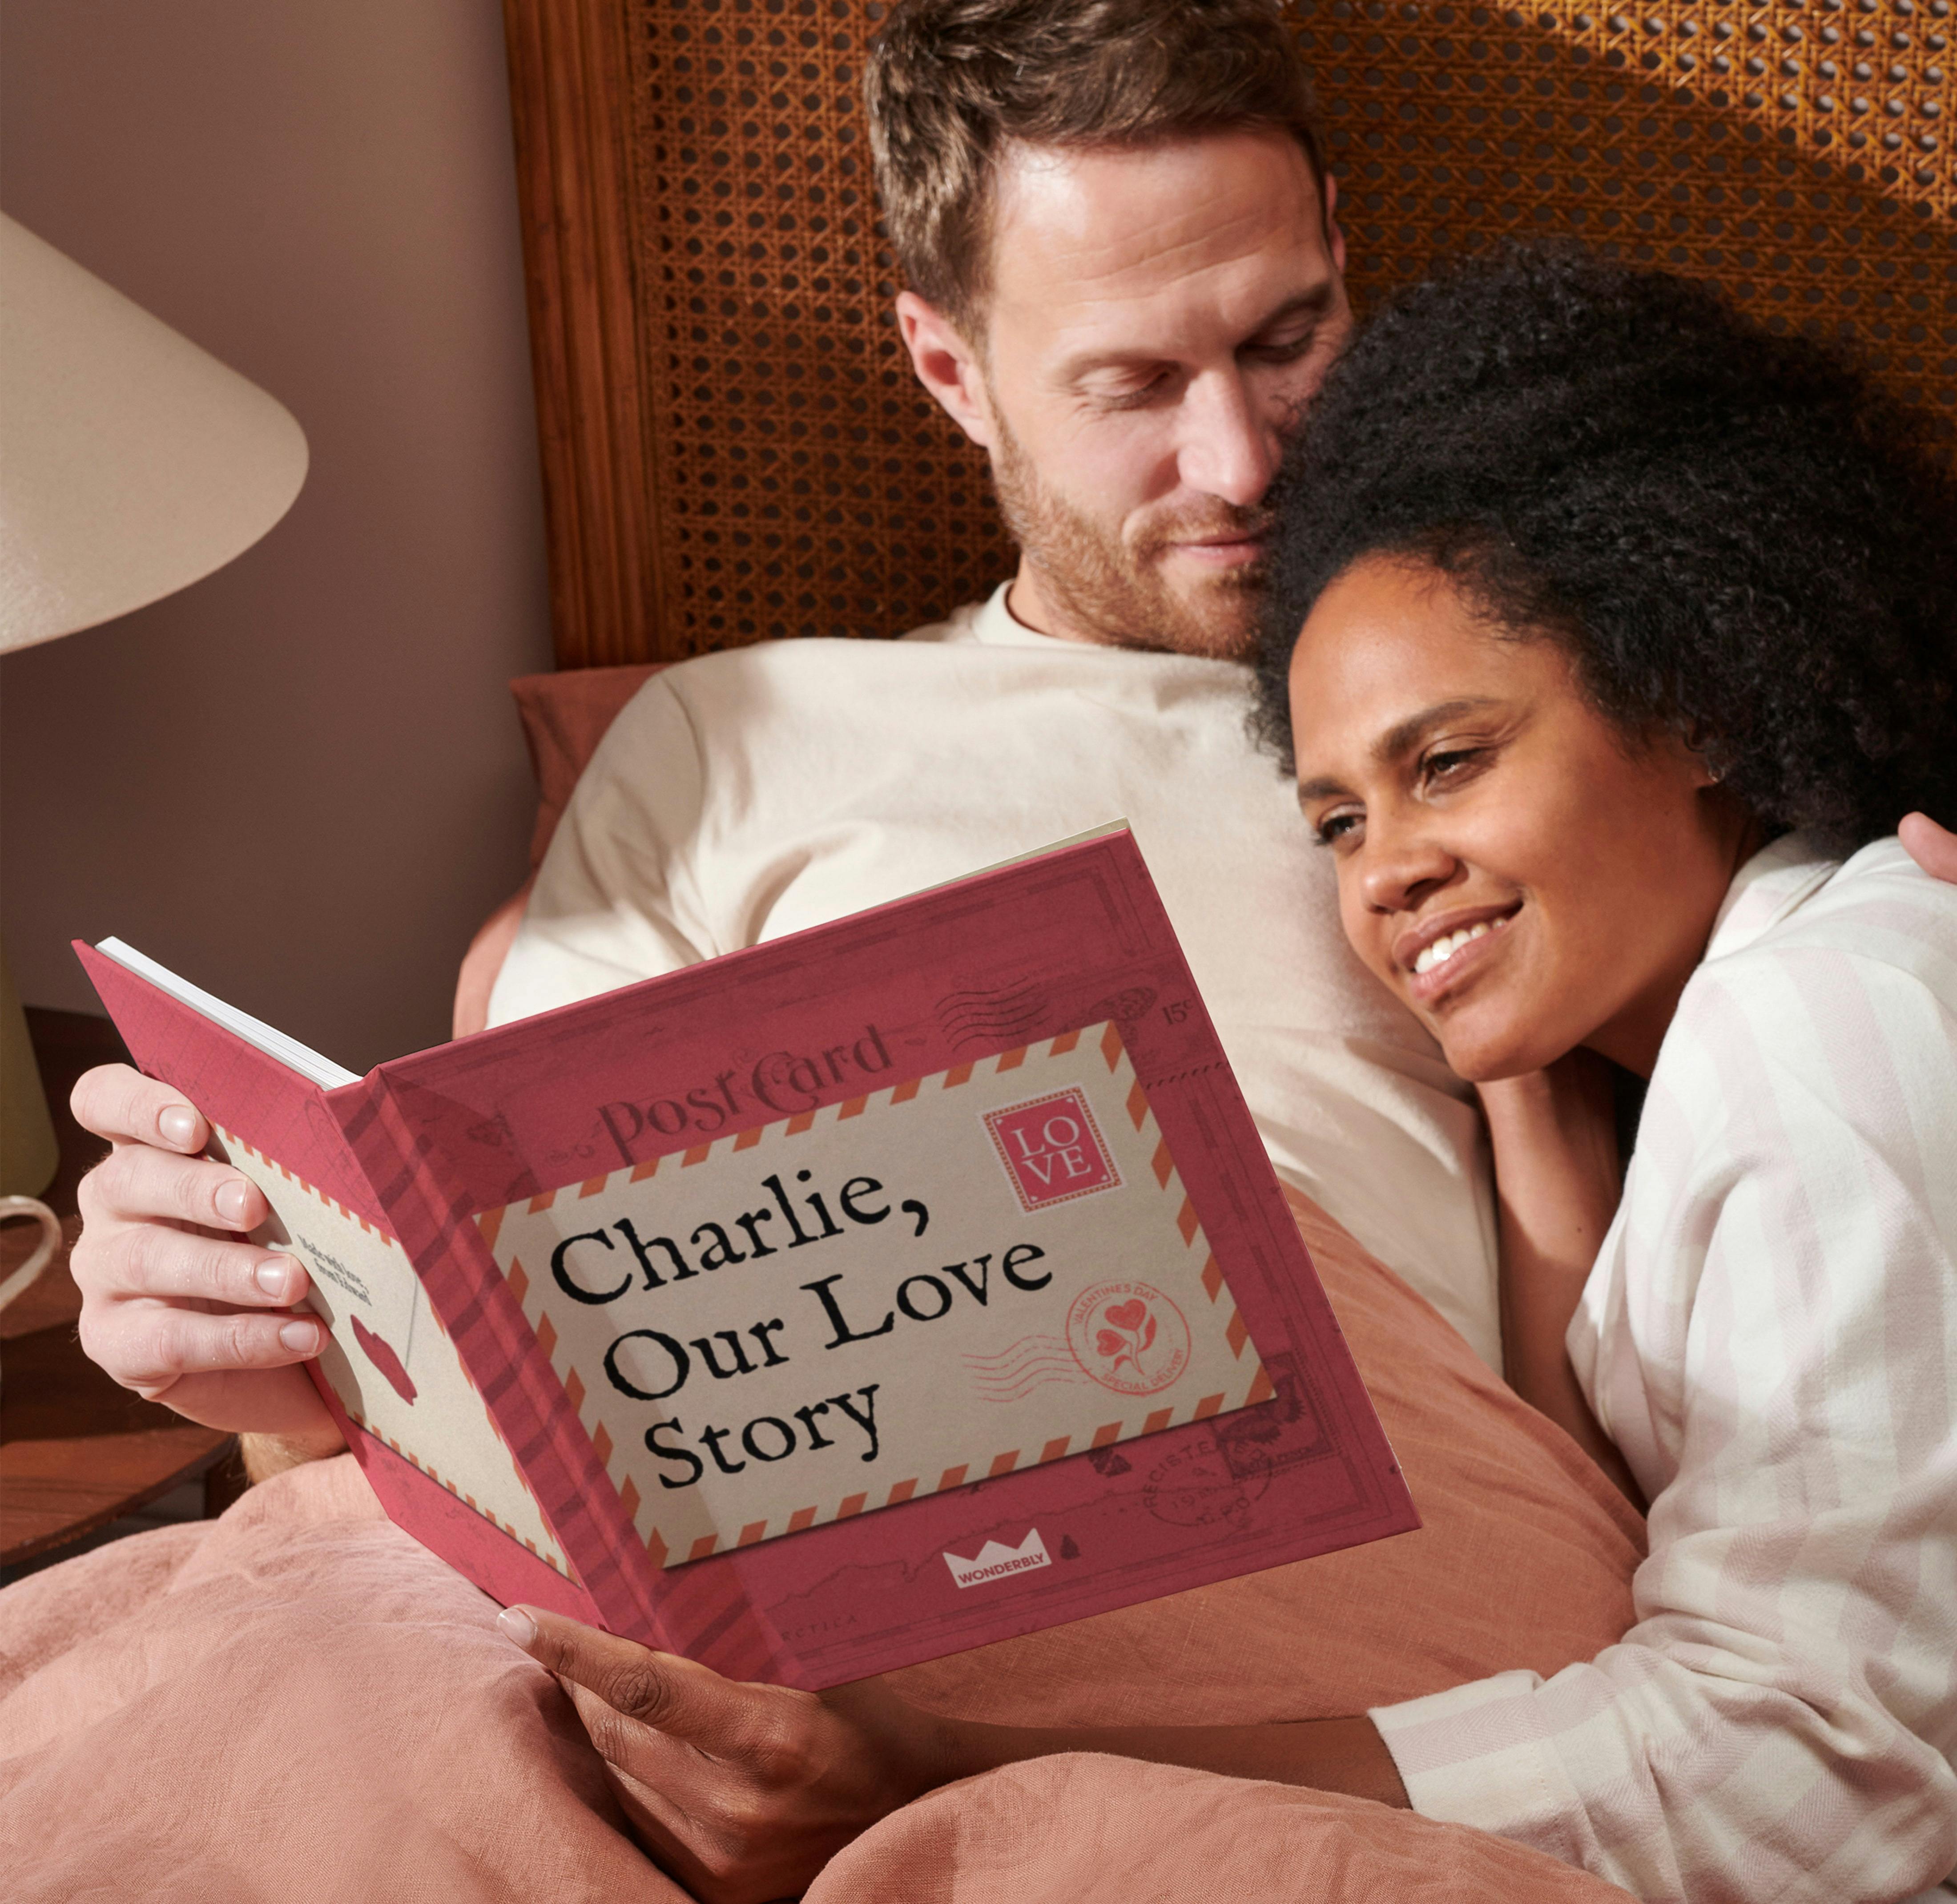 Couple reading personalised book together